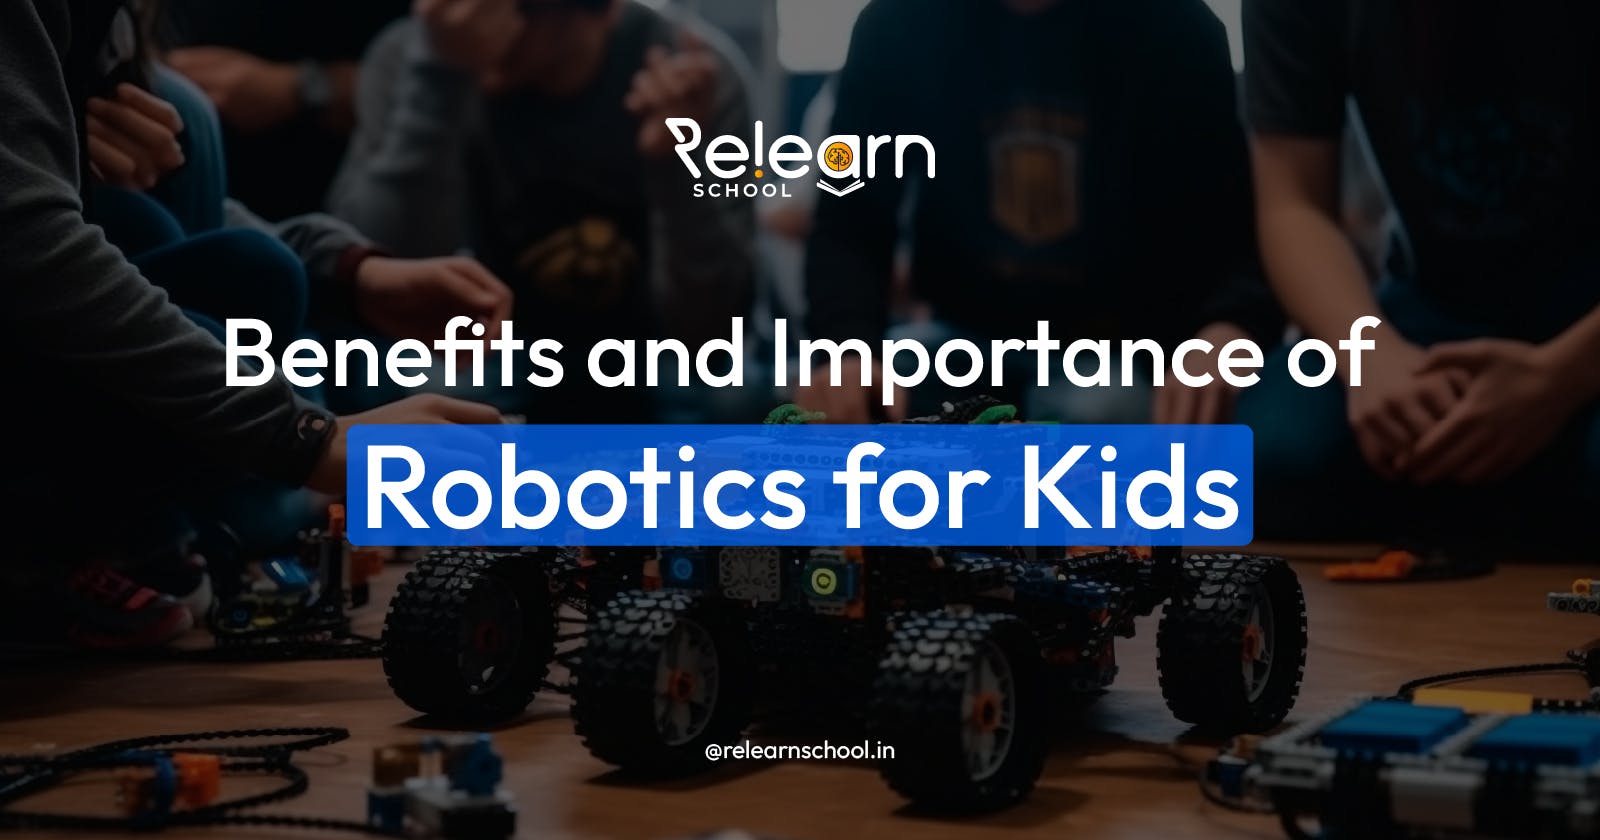 Benefits and Importance of Robotics for Kids